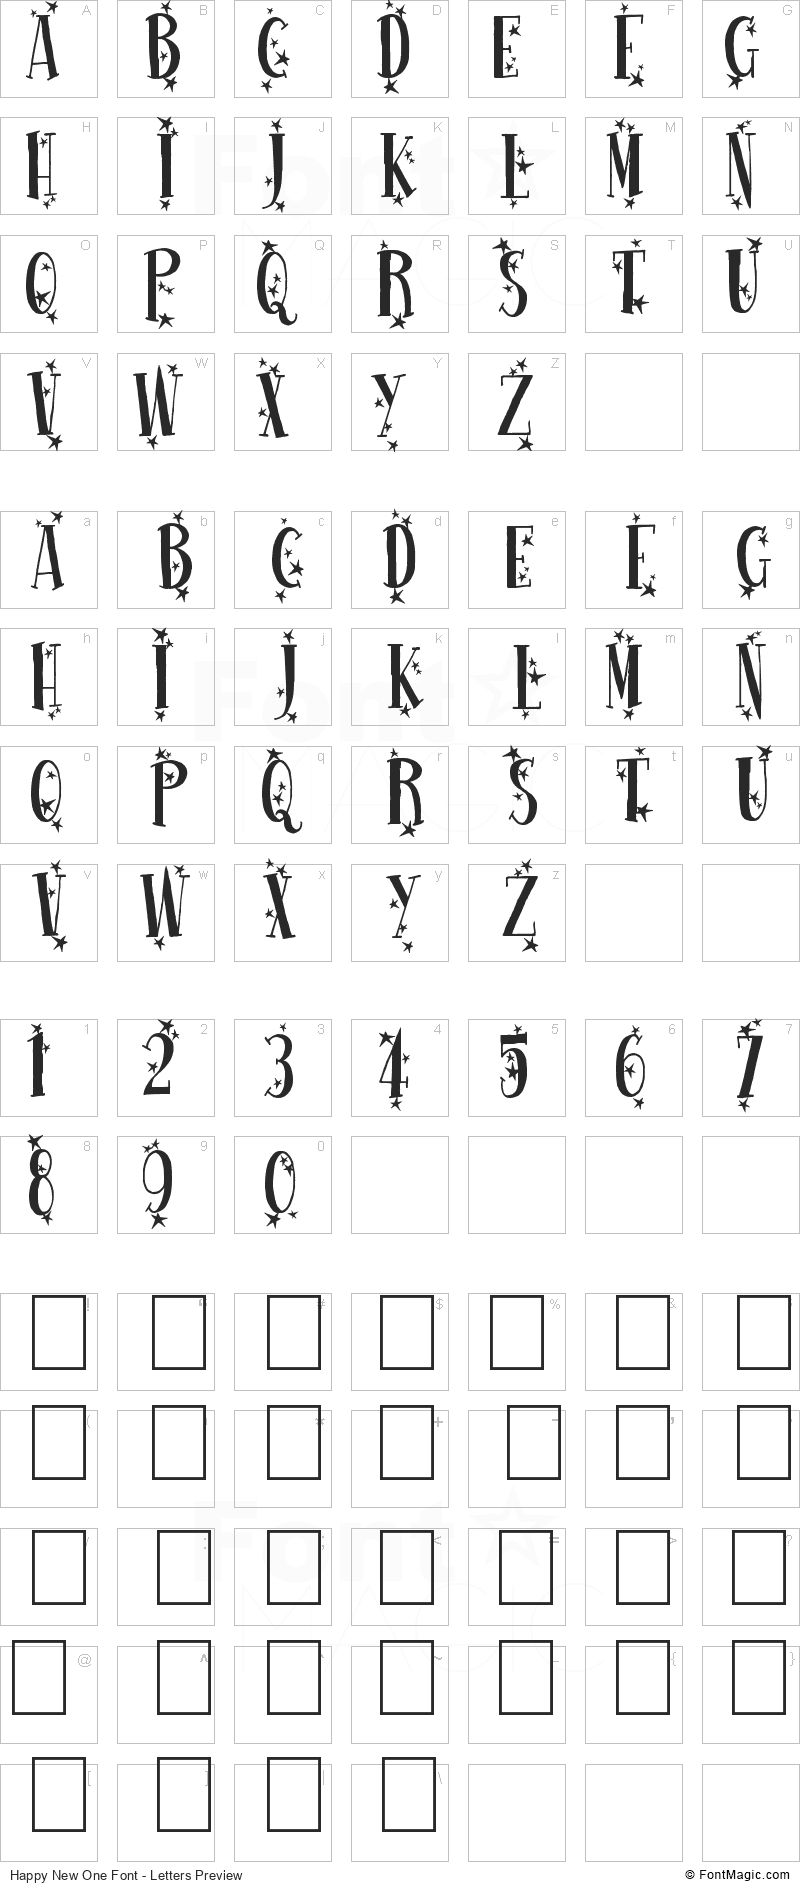 Happy New One Font - All Latters Preview Chart